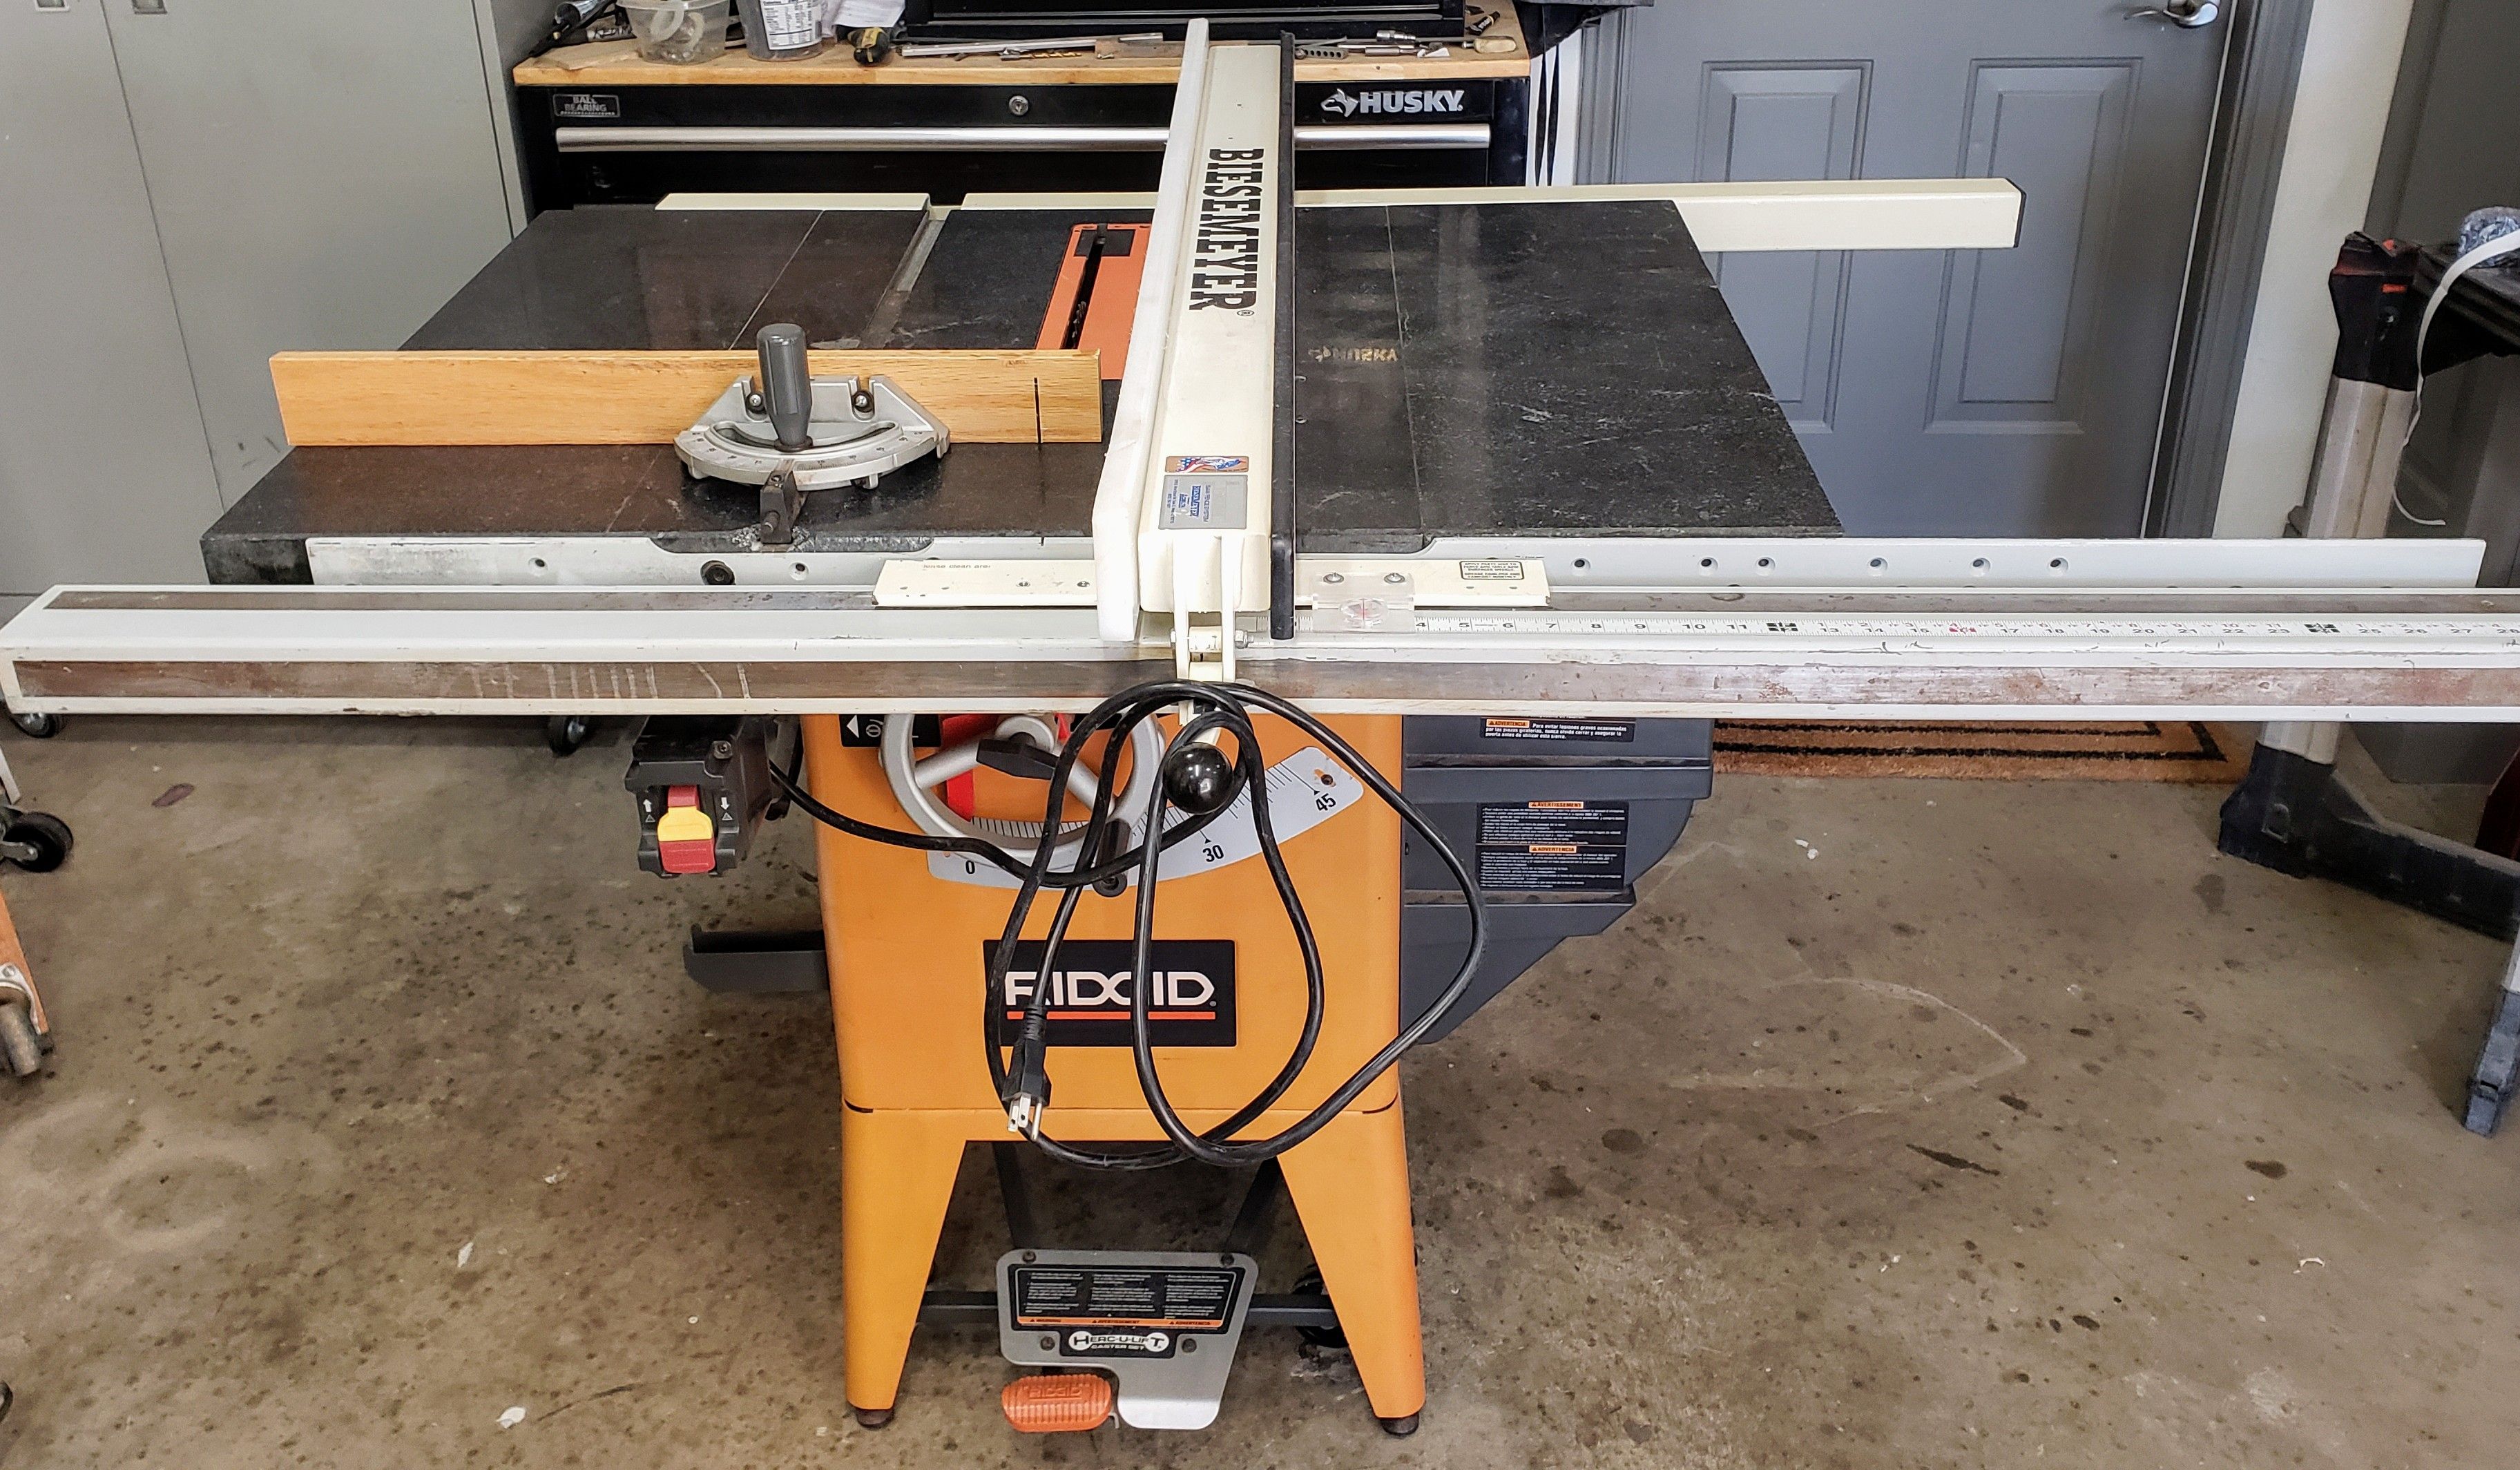 LOWER $$* Hybrid Granite Top Table Saw with Biesemeyer.